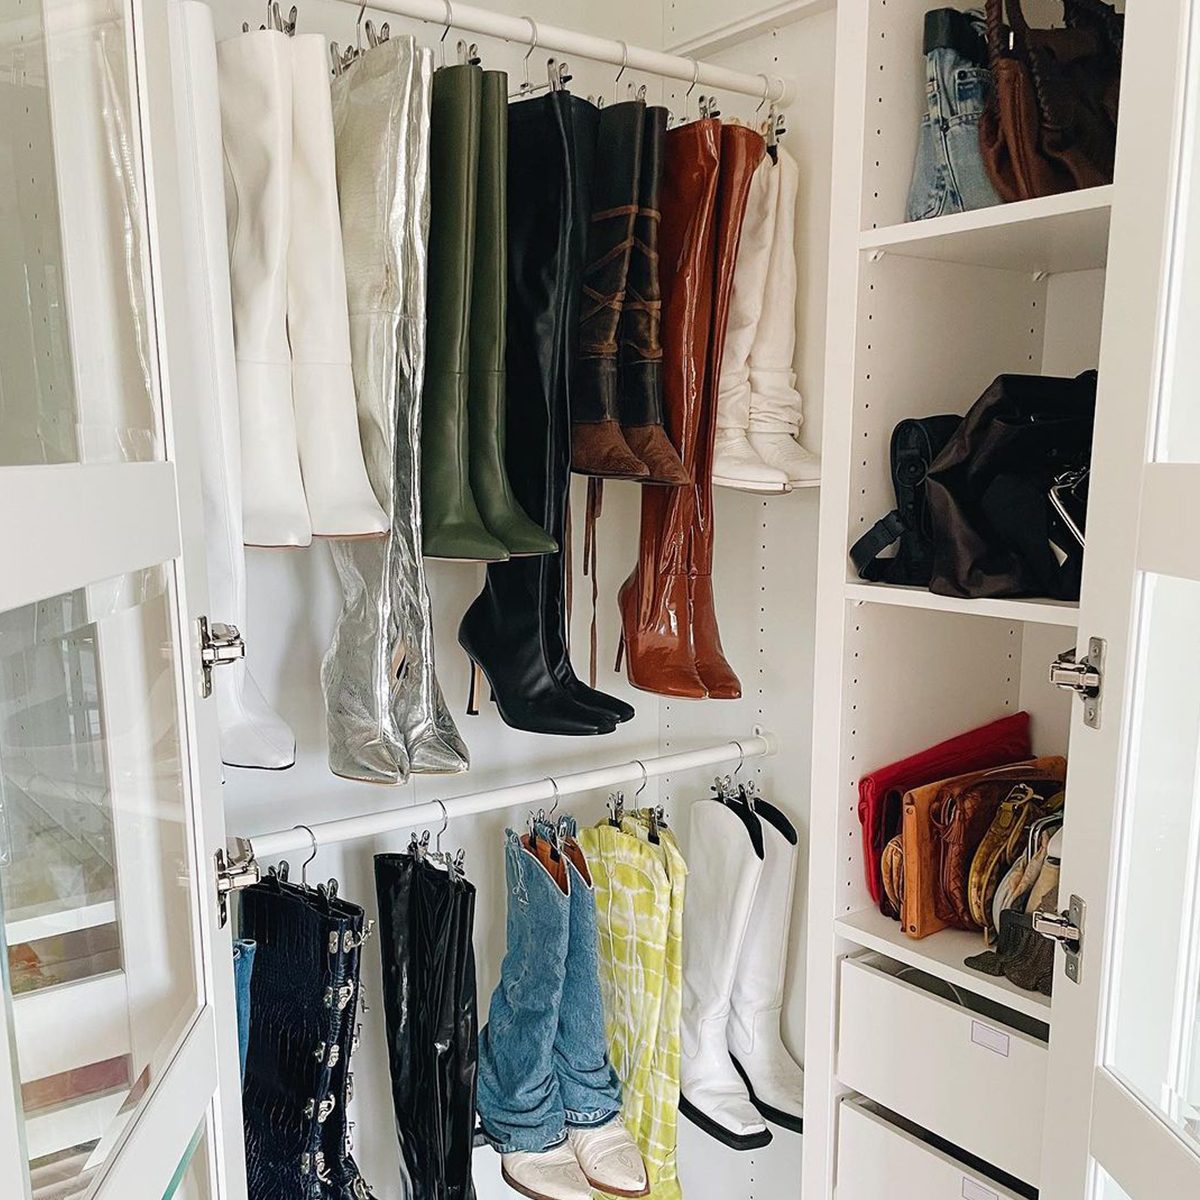 10 Bedroom Closet Ideas to Optimize Your Space